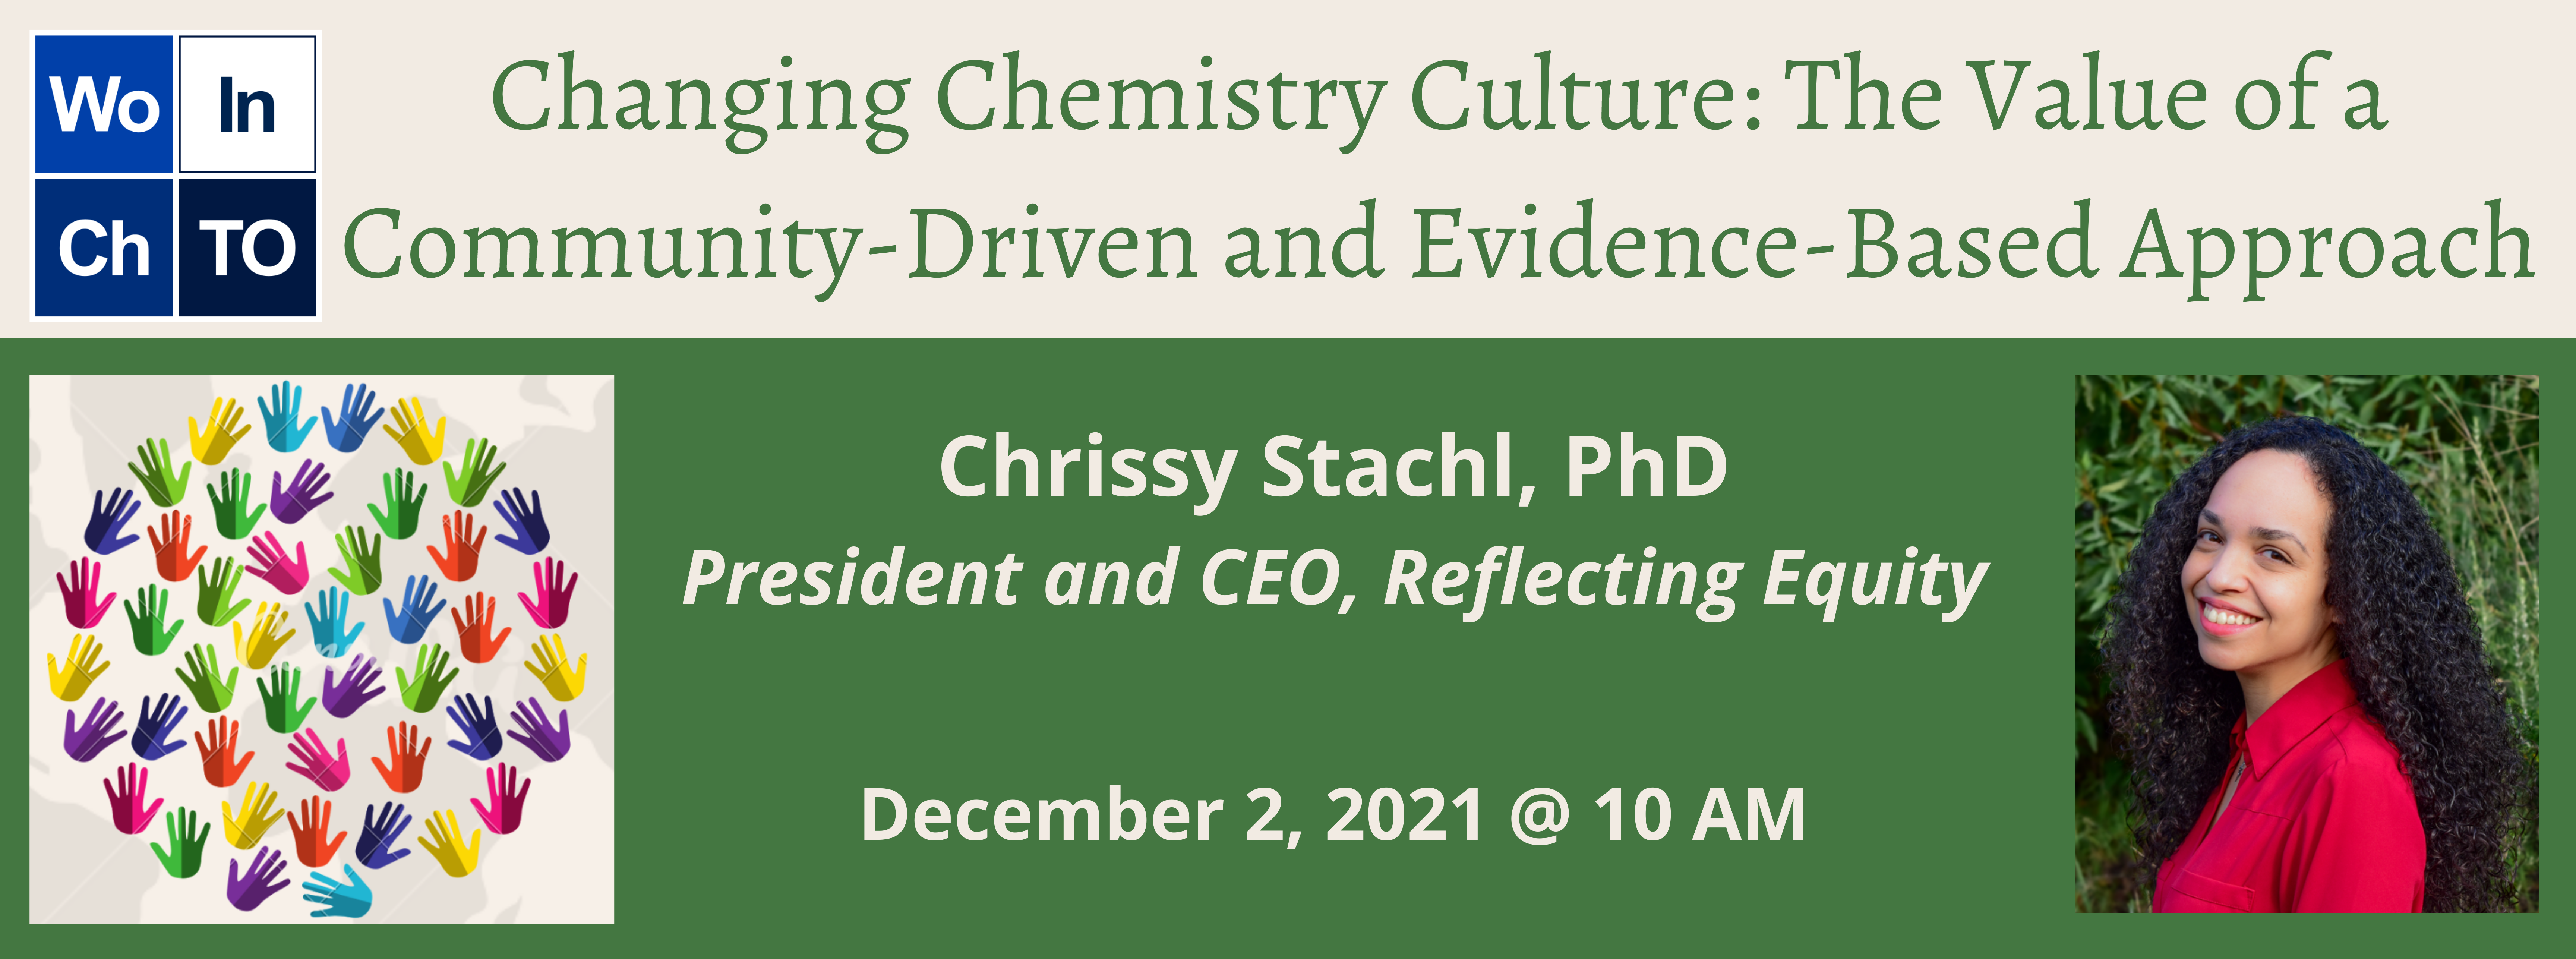 Changing%20Chemistry%20Culture%20The%20Value%20of%20a%20Community-Driven%20and%20Evidence-Based%20Approach